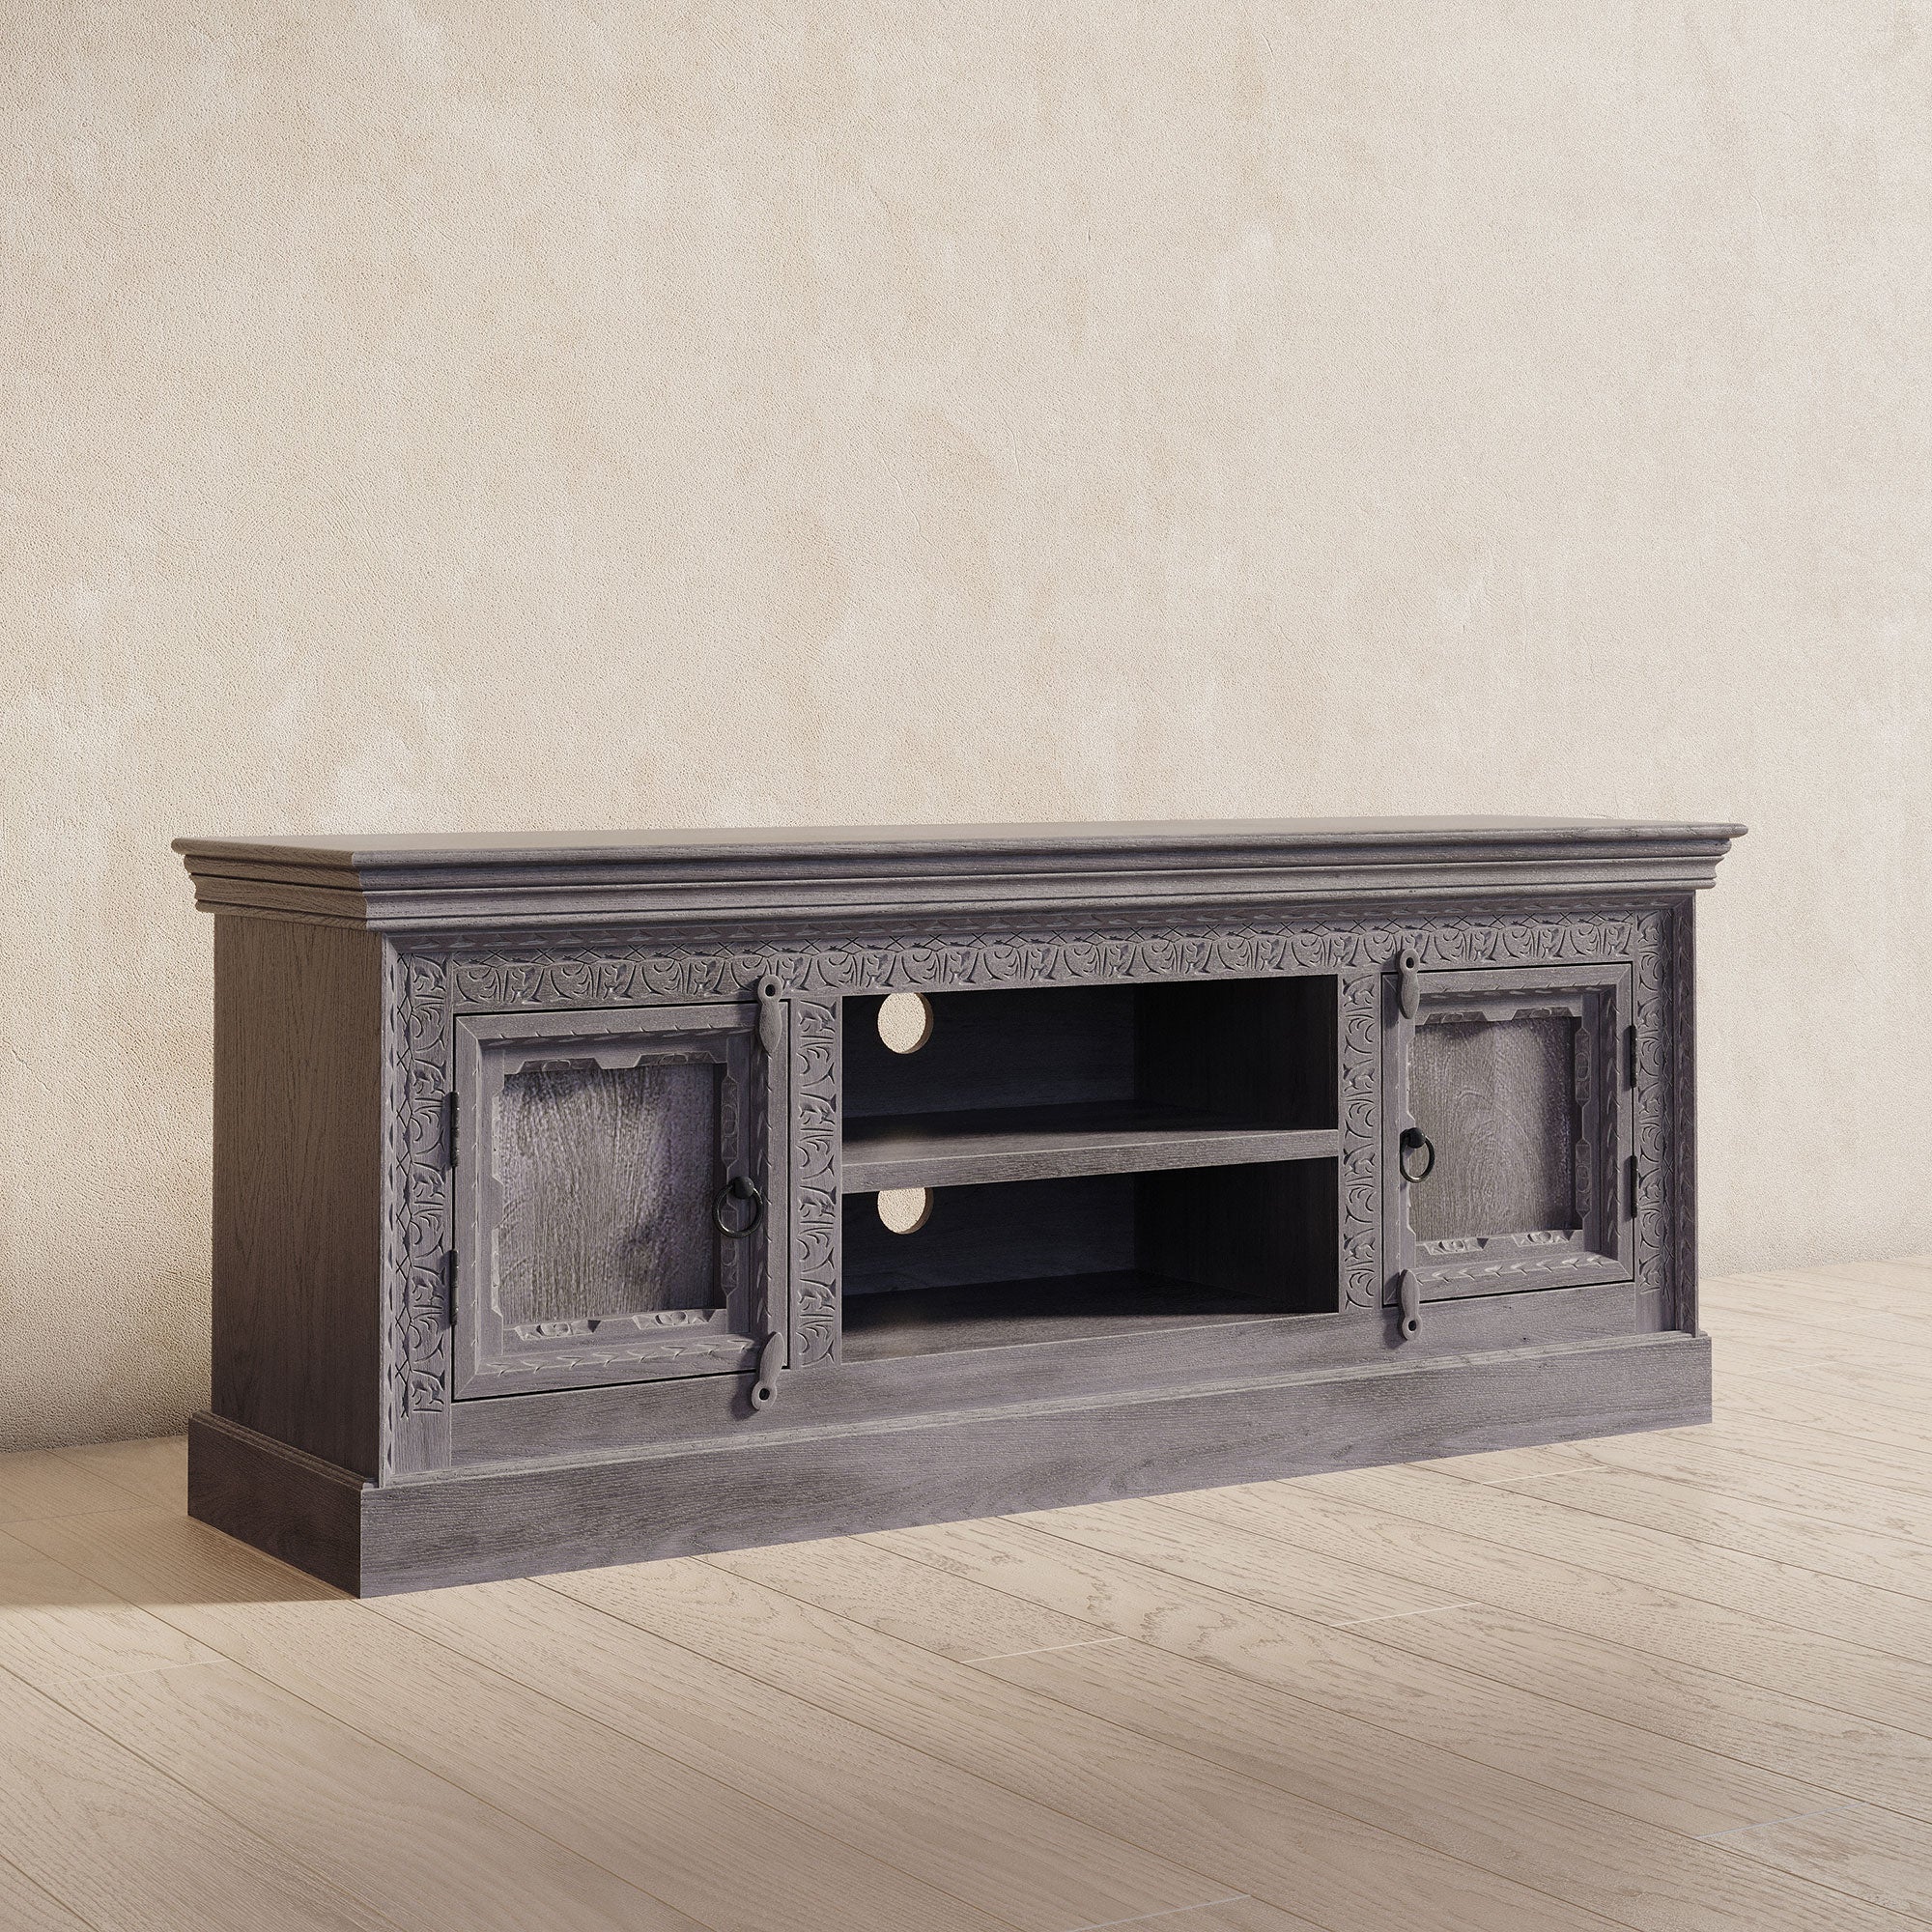 Mahala Nomad Wooden Media Unit in Distressed Grey Finish in Media Units by VMInnovations